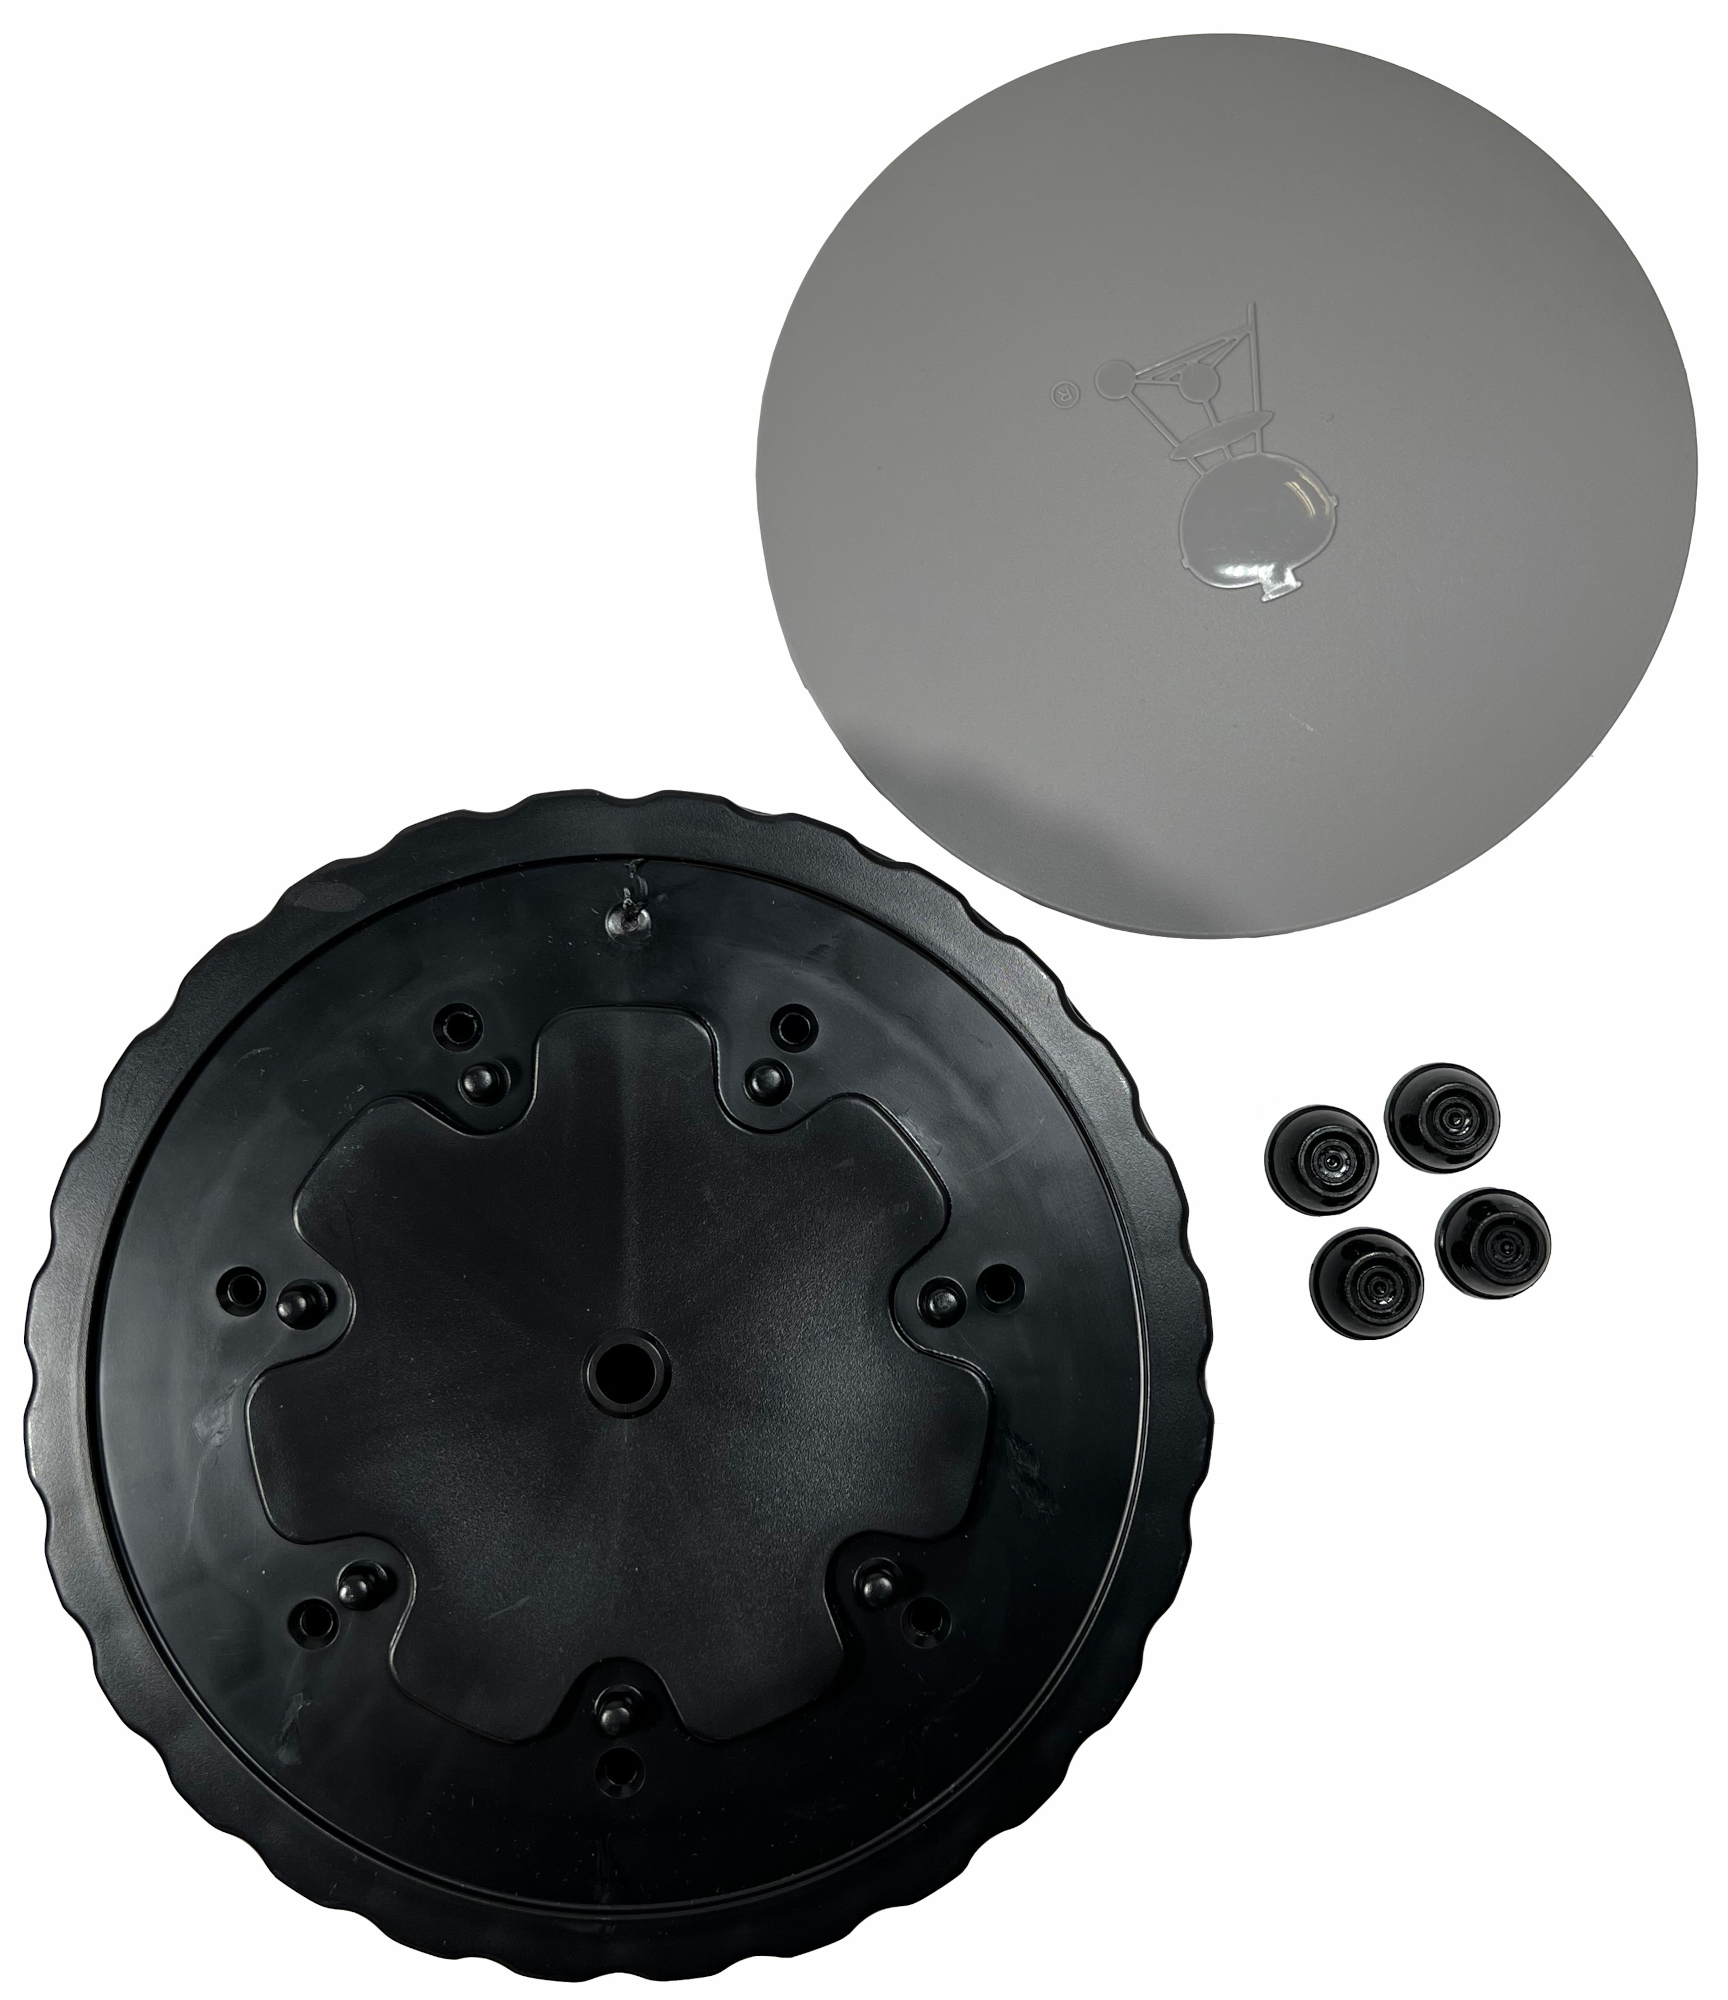 3 Weber Grill Part # 63050 8" Wheel and Cap - Gas and Charcoal Kettle Grills - image 3 of 3